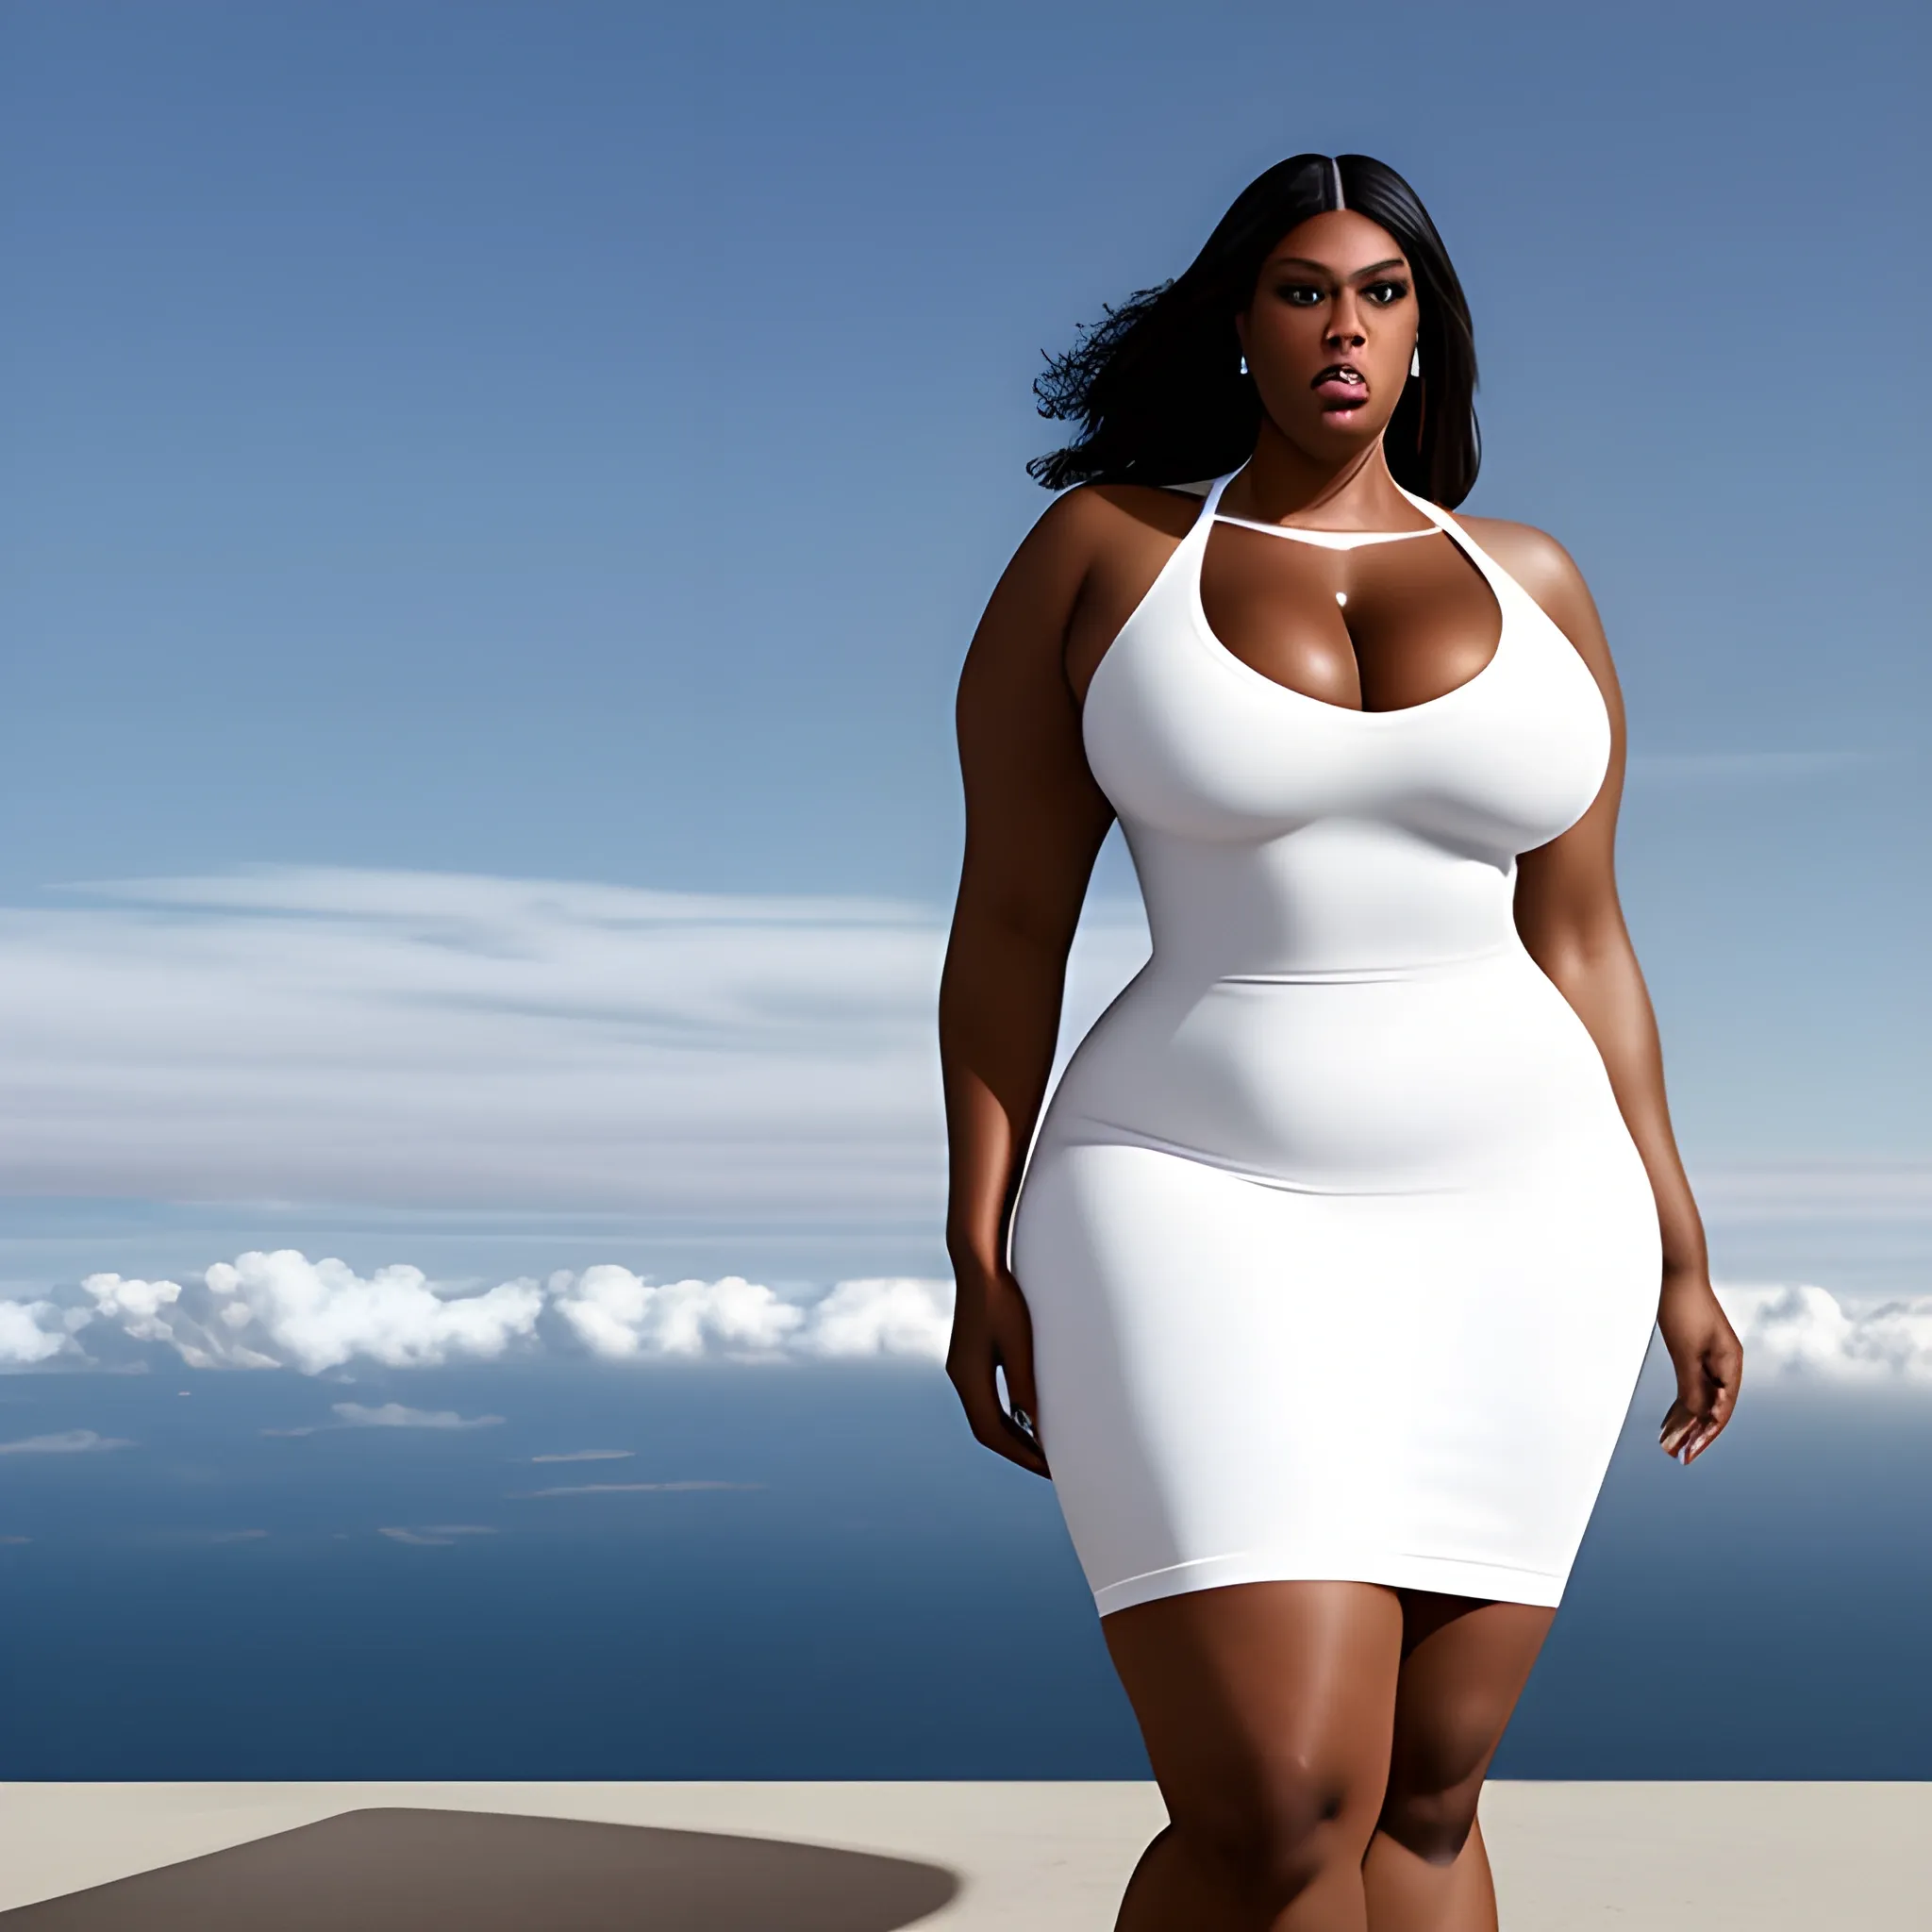 extremly tall, huge, massive plus size and muscular beautiful black girl in plain tight white dress, with very broad shoulders, long neck, small narrow head with long chin standing out, towerring under the clouds and looking down to us